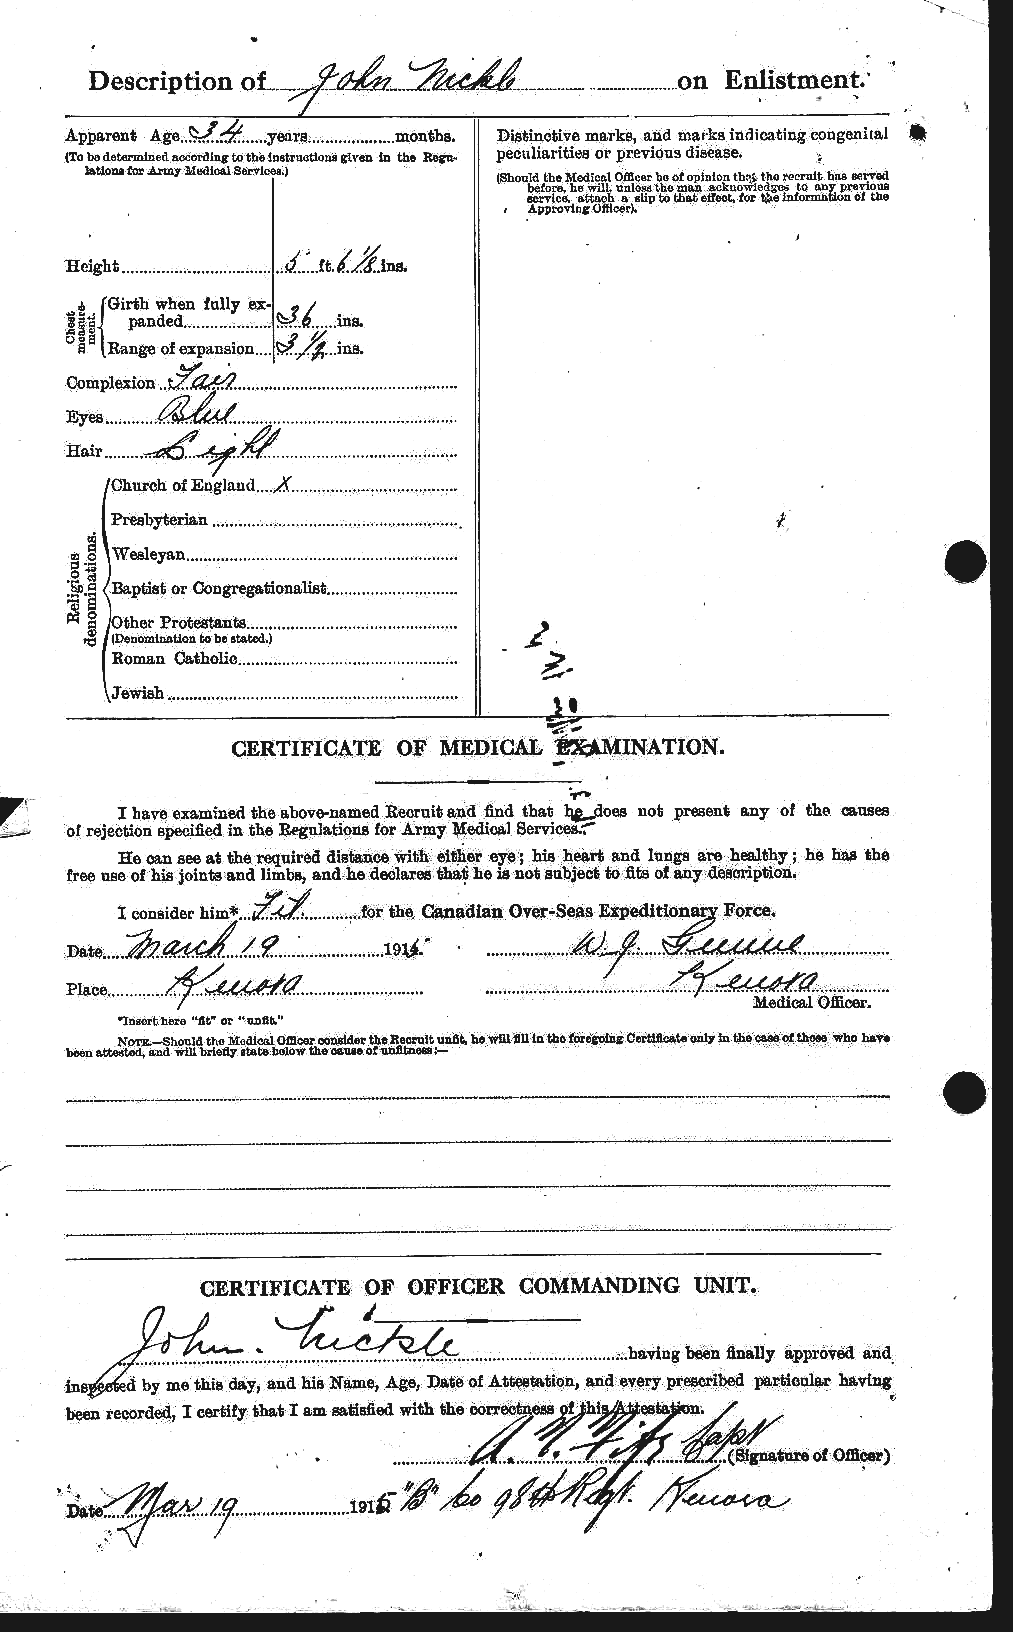 Personnel Records of the First World War - CEF 556662b